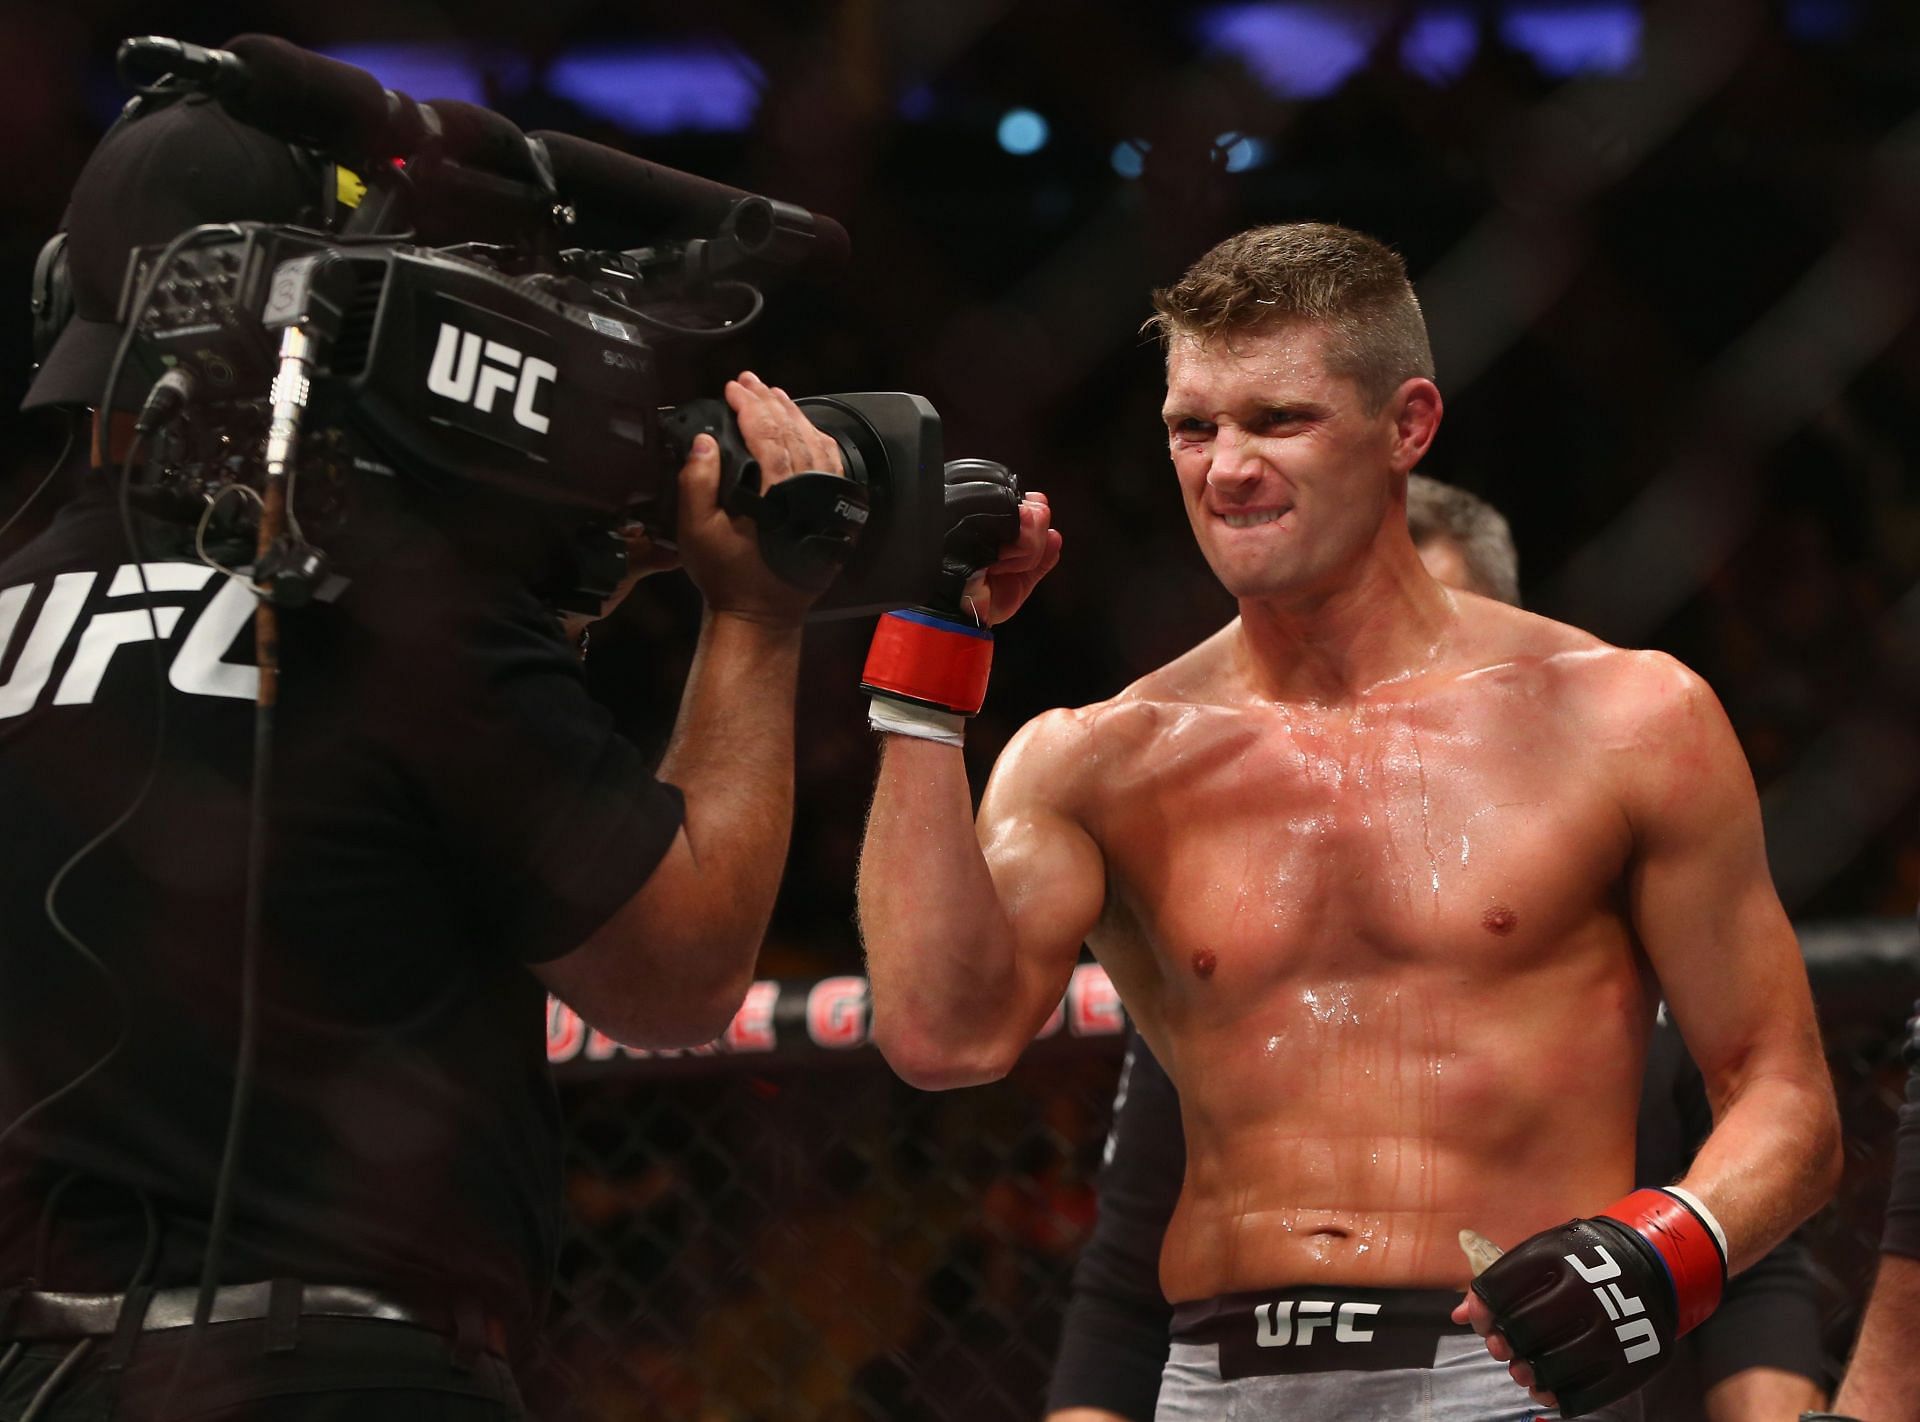 Stephen Thompson still has one of the trickiest striking games in the UFC